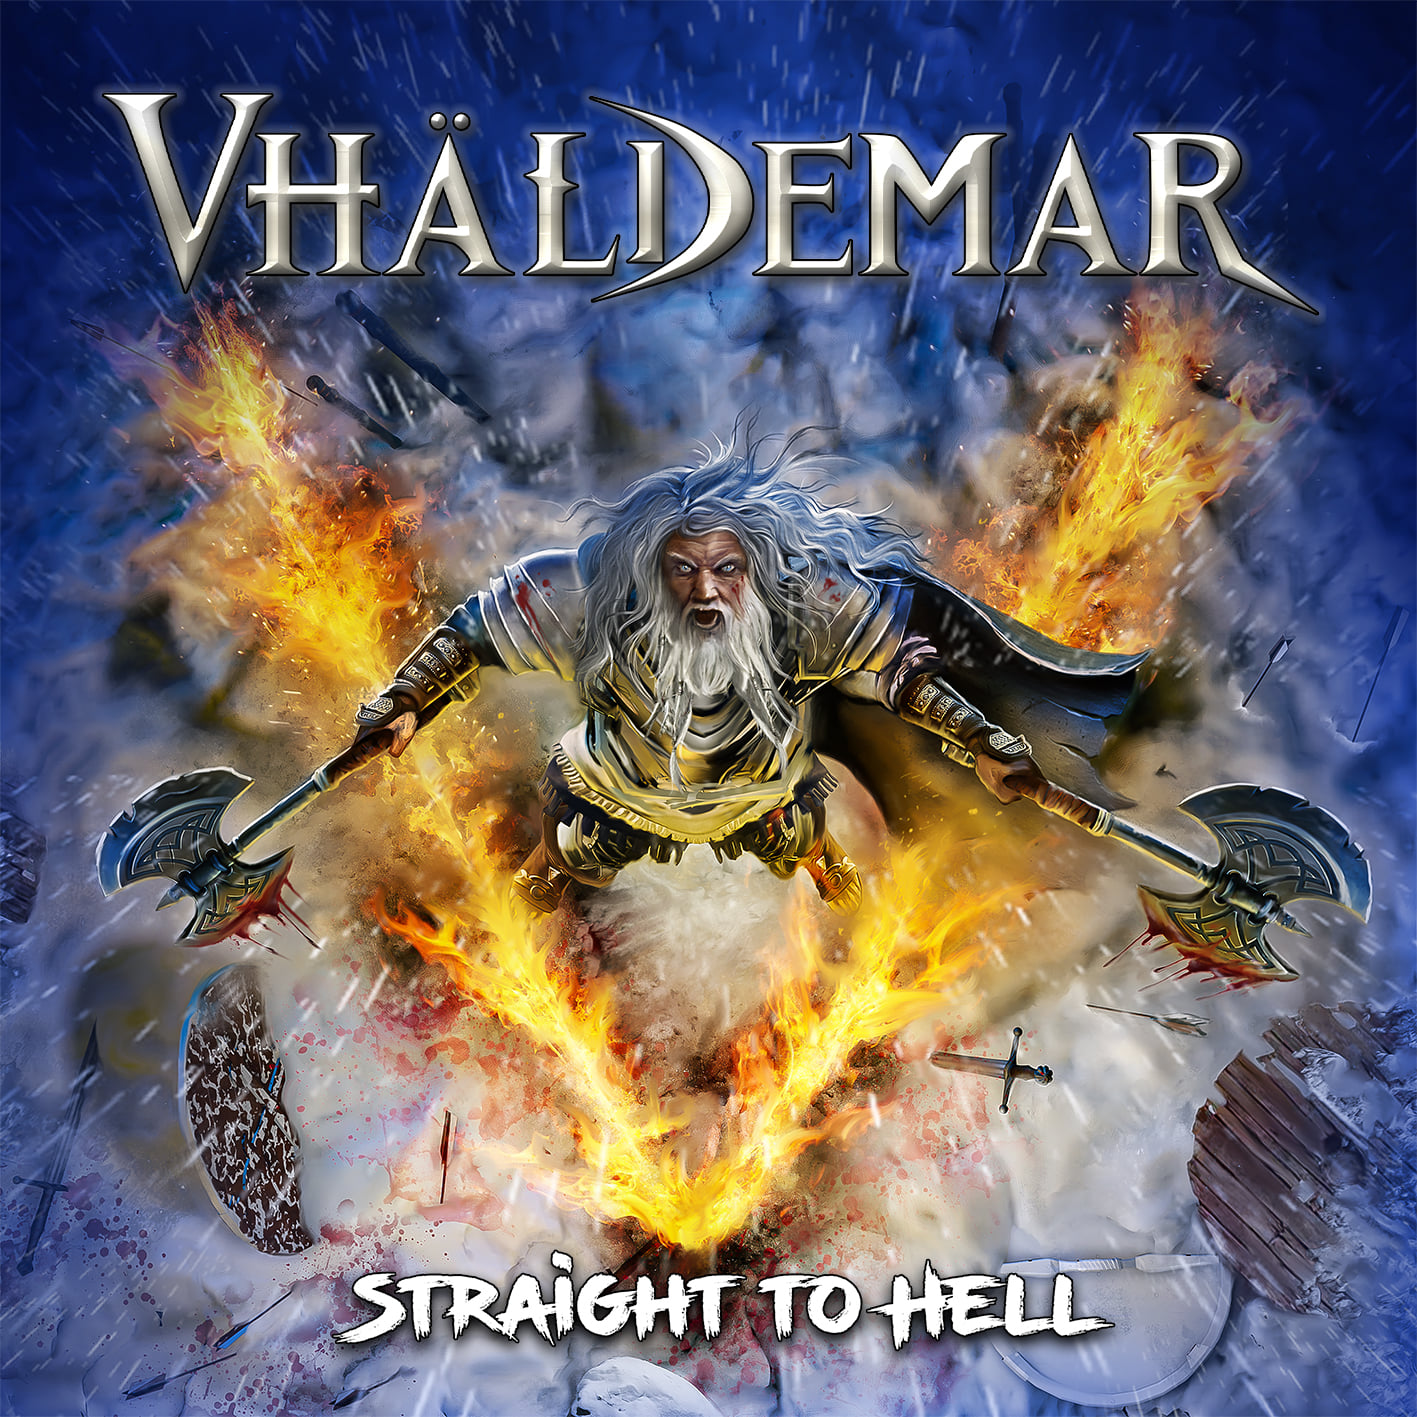 vhaldemar - straight to hell pic 1